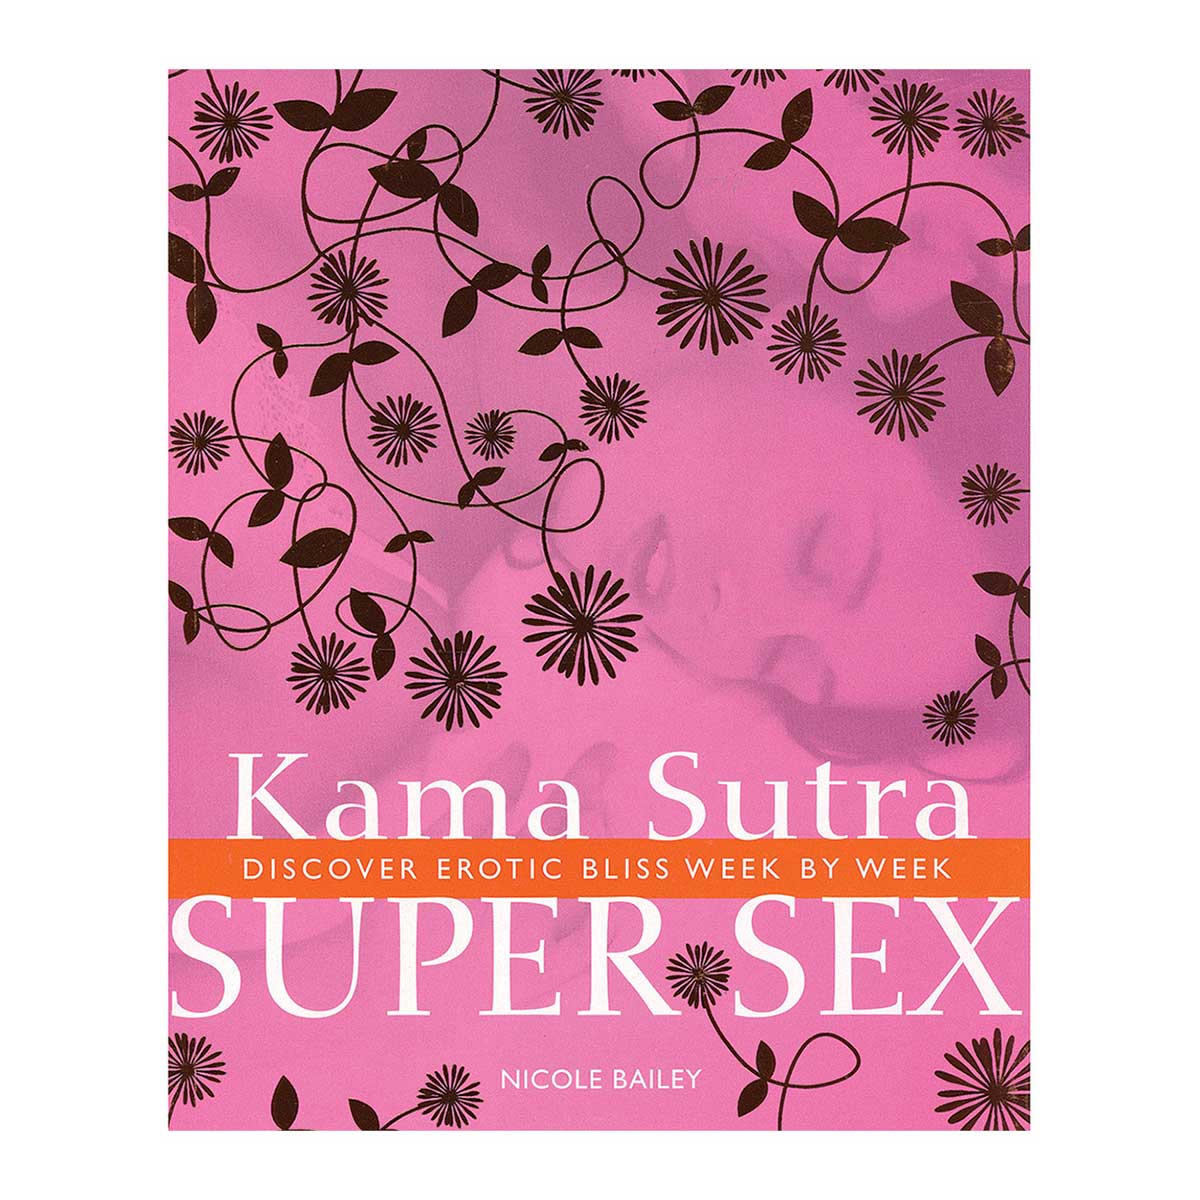 Kama Sutra Super Sex - Discover Erotic Bliss Week by Week - Duncan Baird Publishers